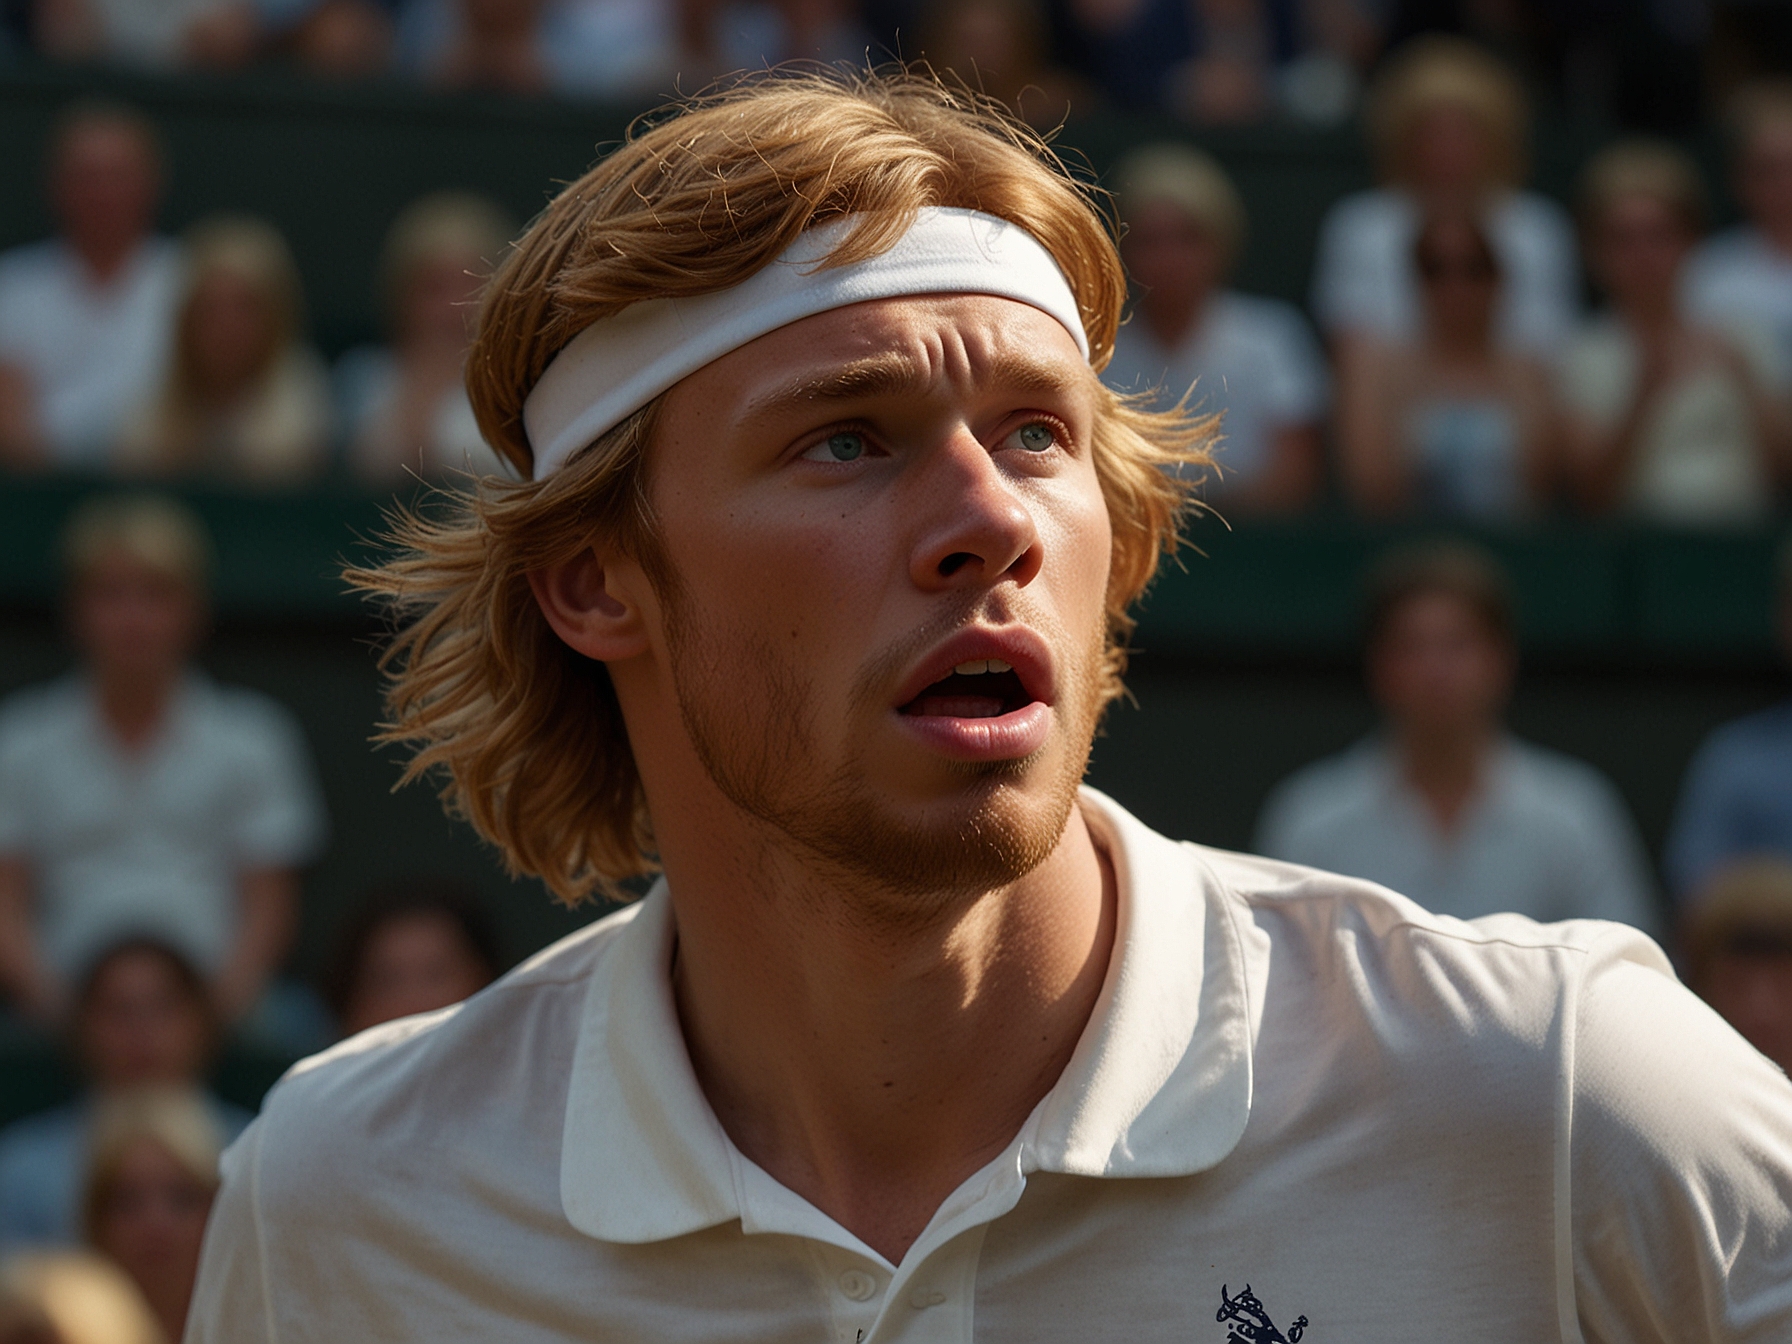 Andrey Rublev seen during his intense match at Wimbledon, just before smashing his racket in frustration, with the crowd looking on in shock and disbelief.